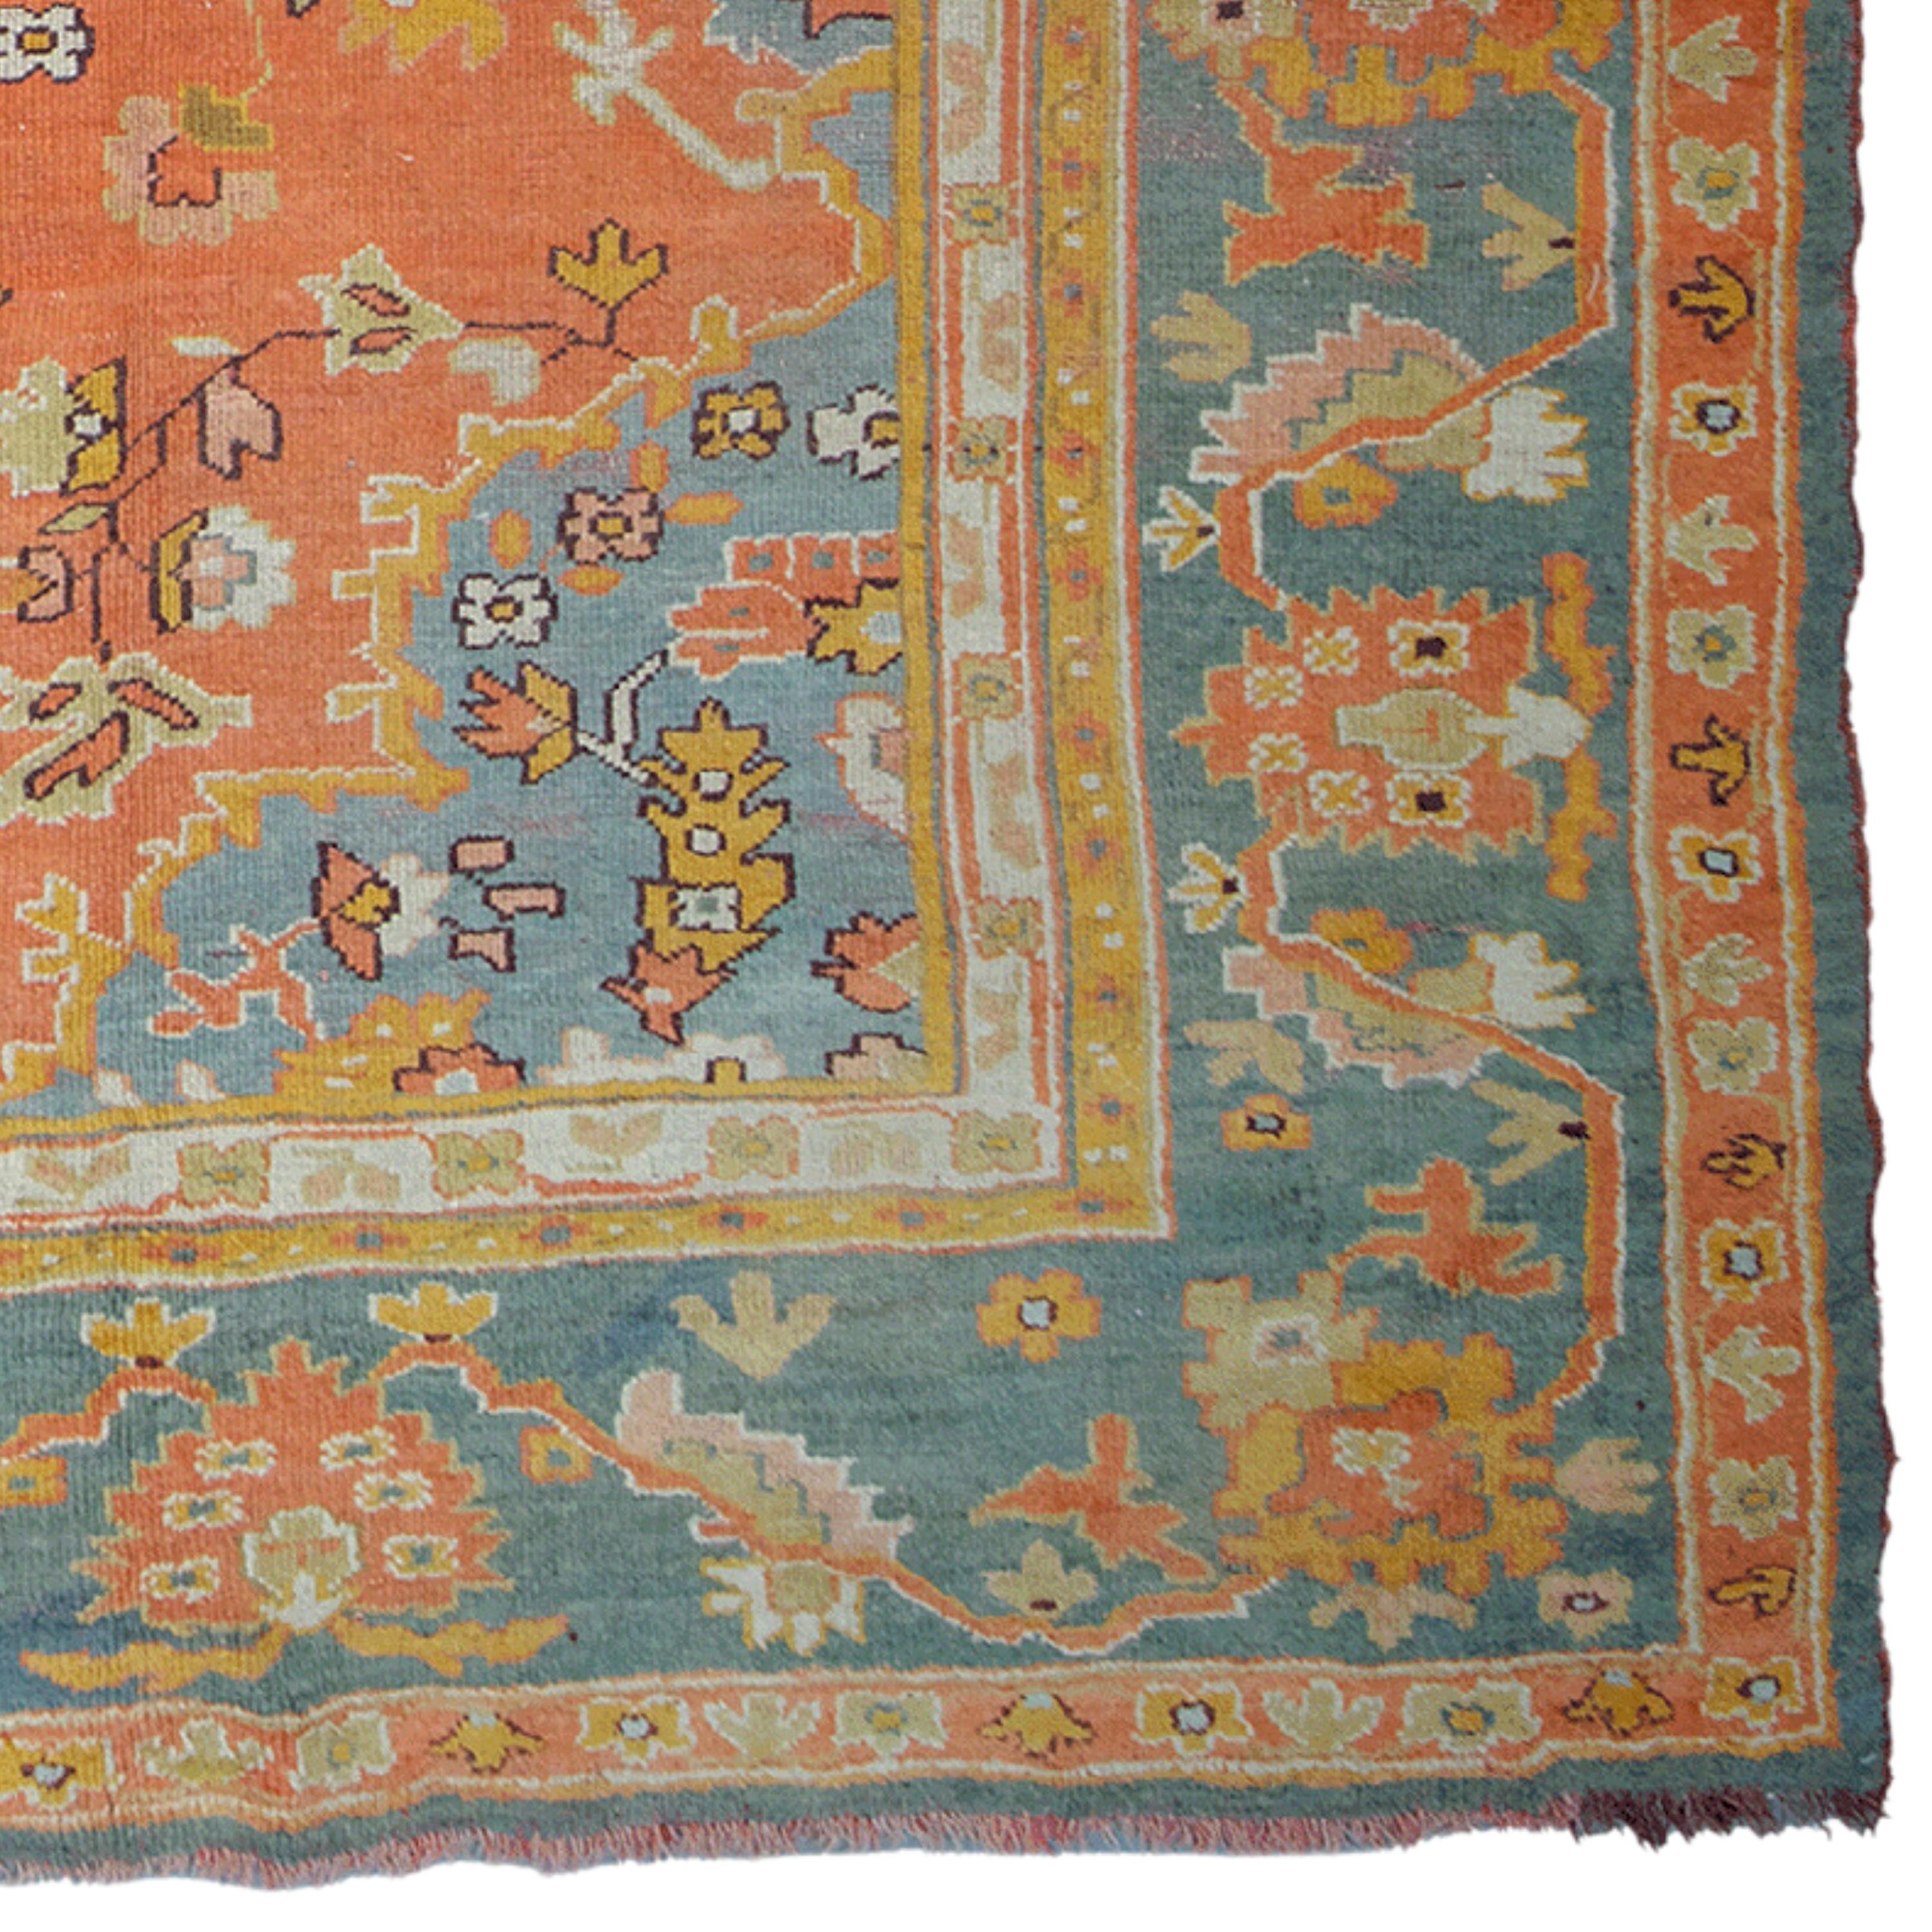 Antique Ushak Carpet, Late 19th Century

This elegant late 19th century antique Ushak carpet brings the elegance and sophisticated design of the Ottoman period to your home. This hand-woven rug in rich shades of red and blue is known for its